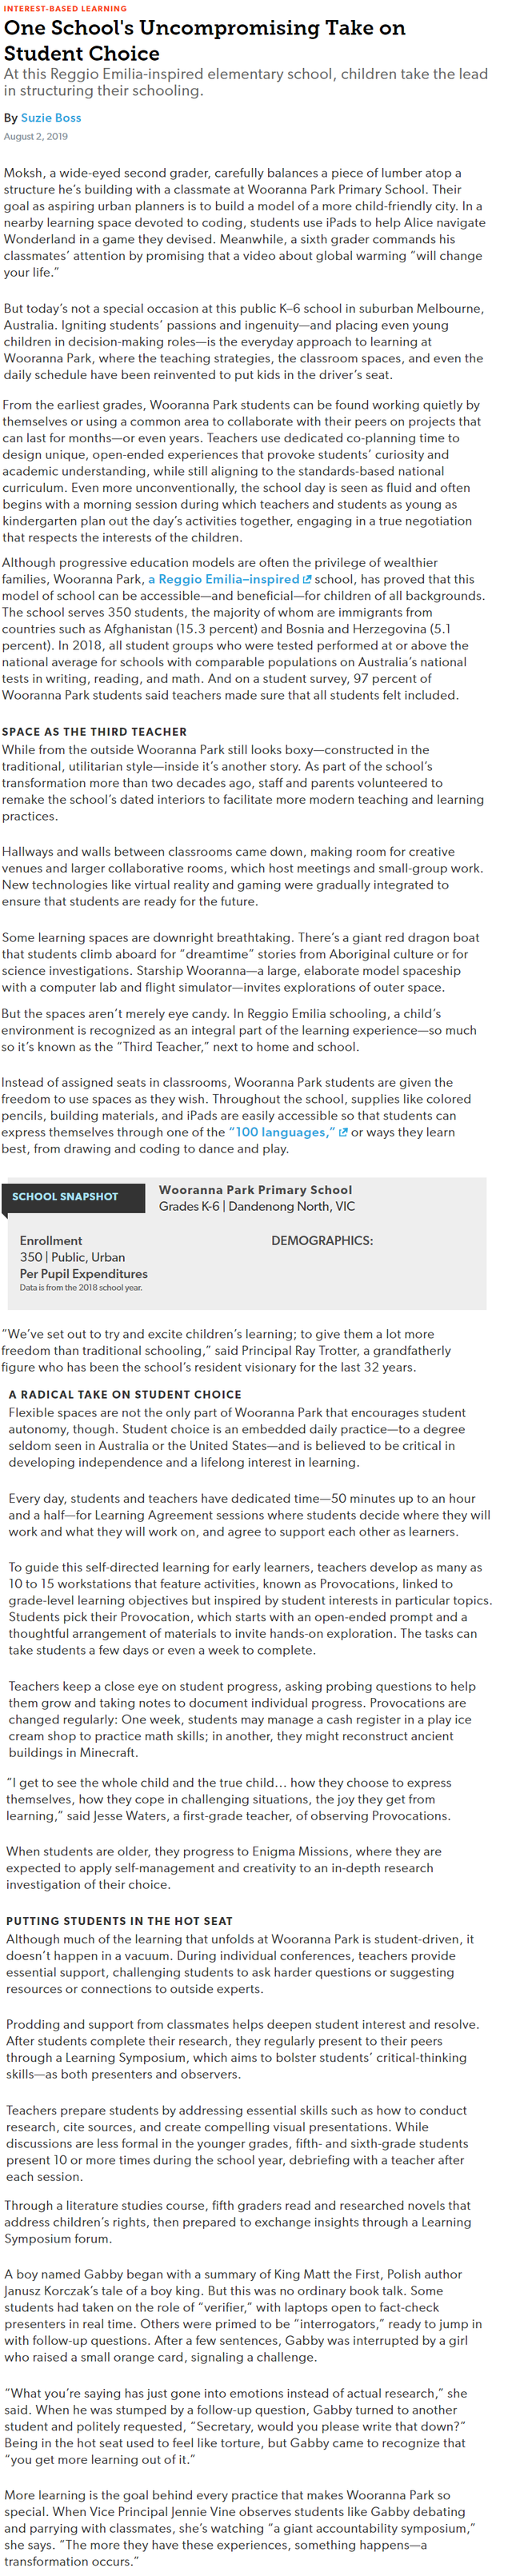 edutopia - One School's Uncompromising Take on Student Choice.png